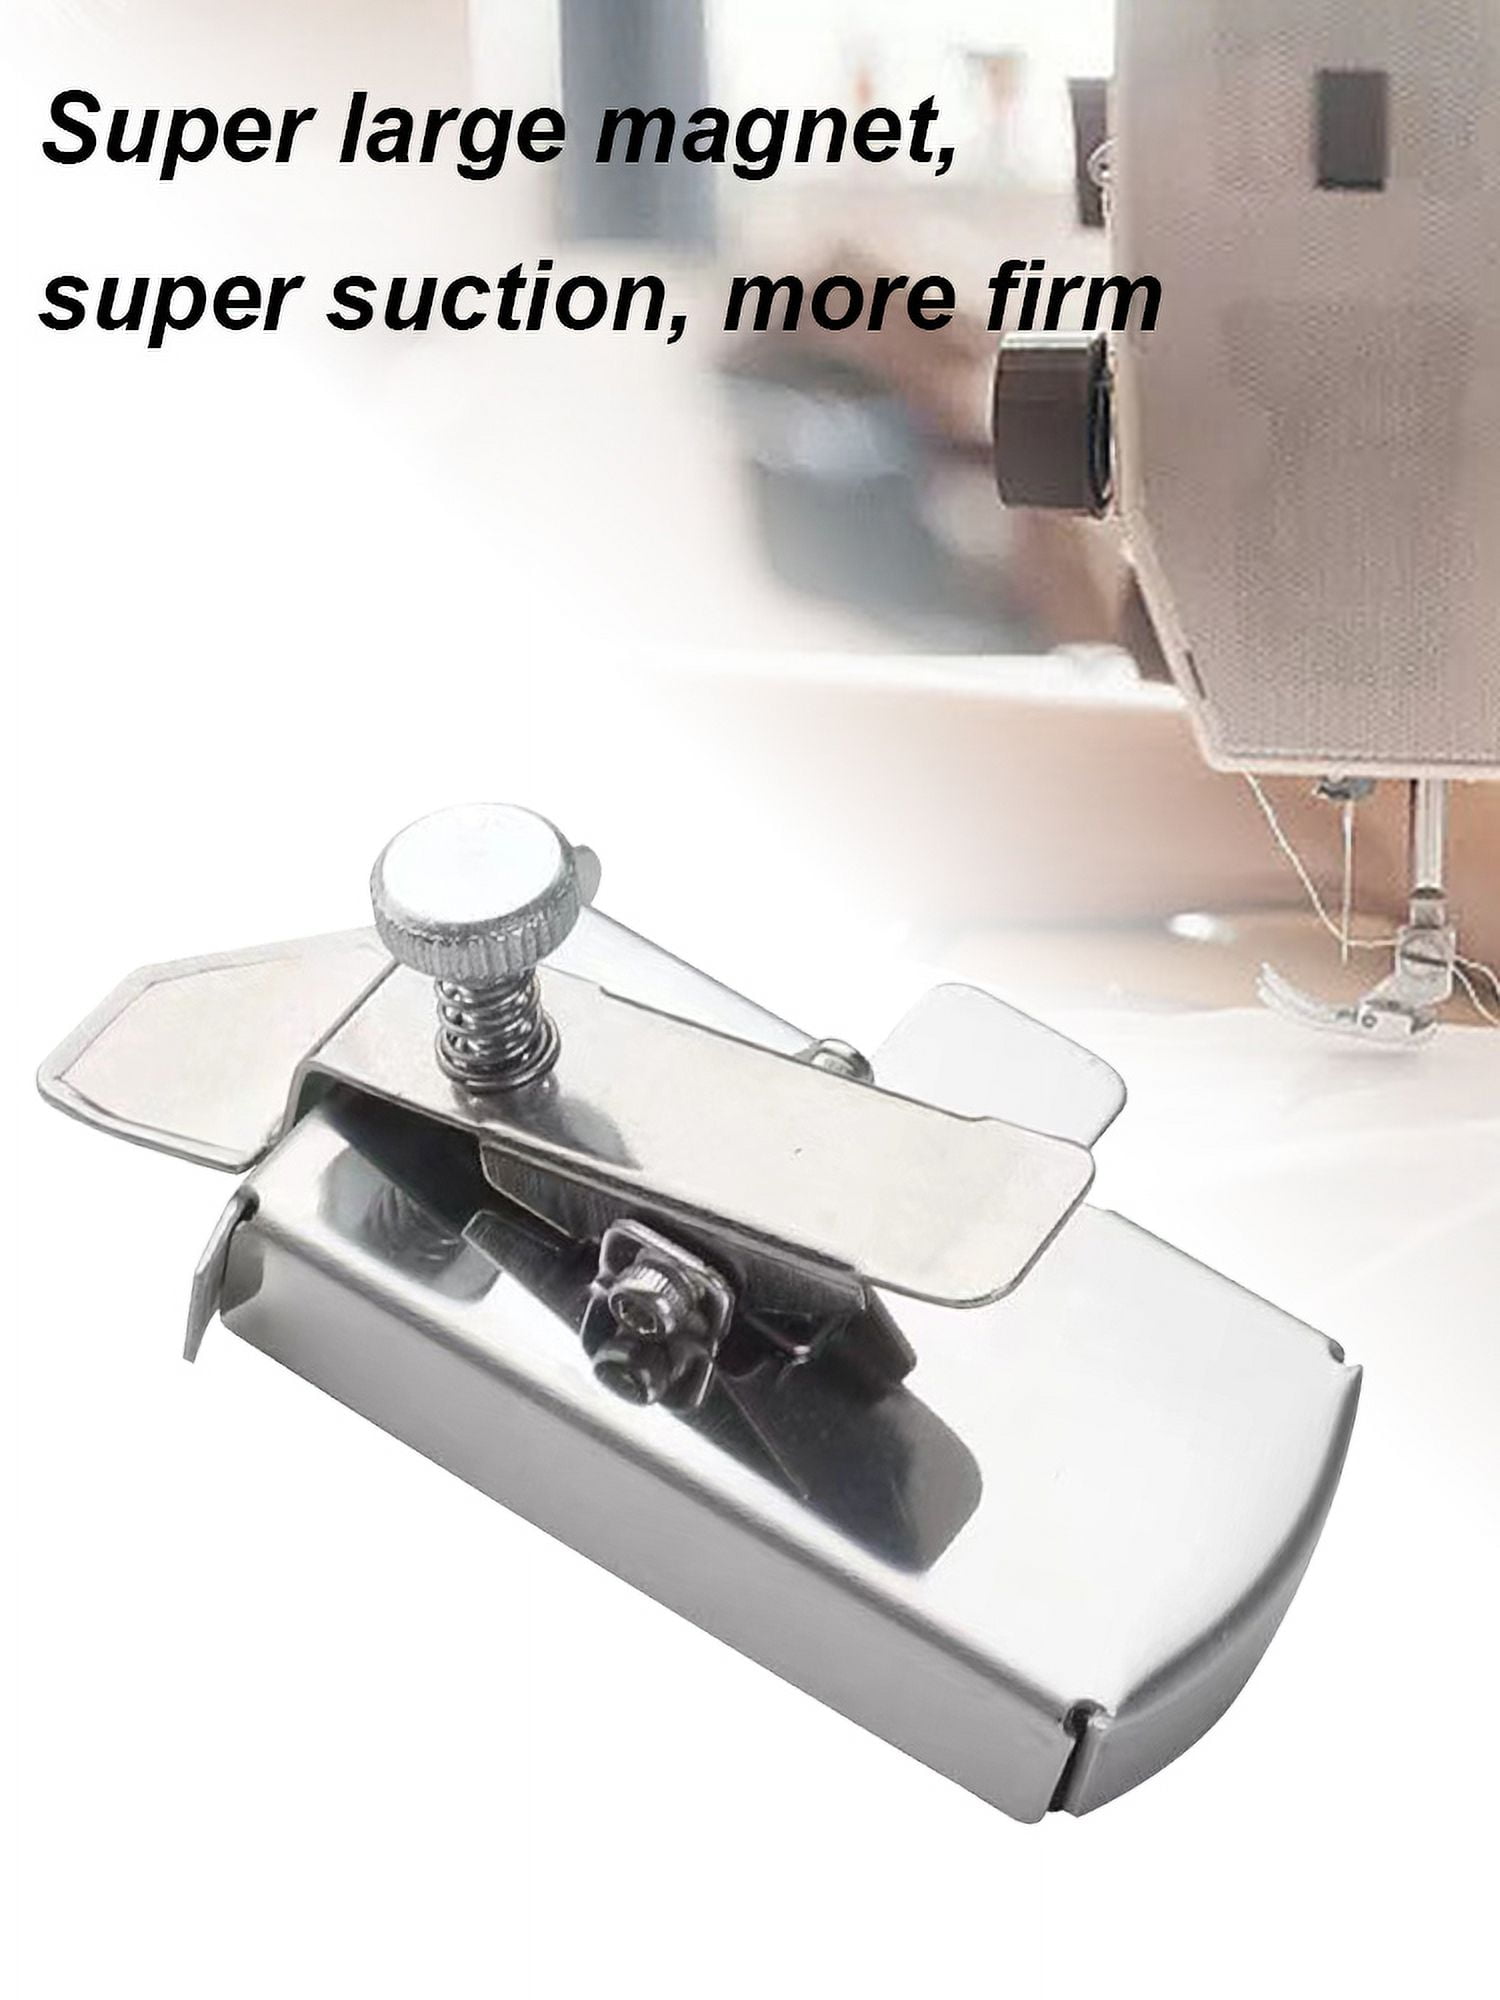 2pcs Universal Magnetic Seam Guide Sewing Machine Foot Sewing